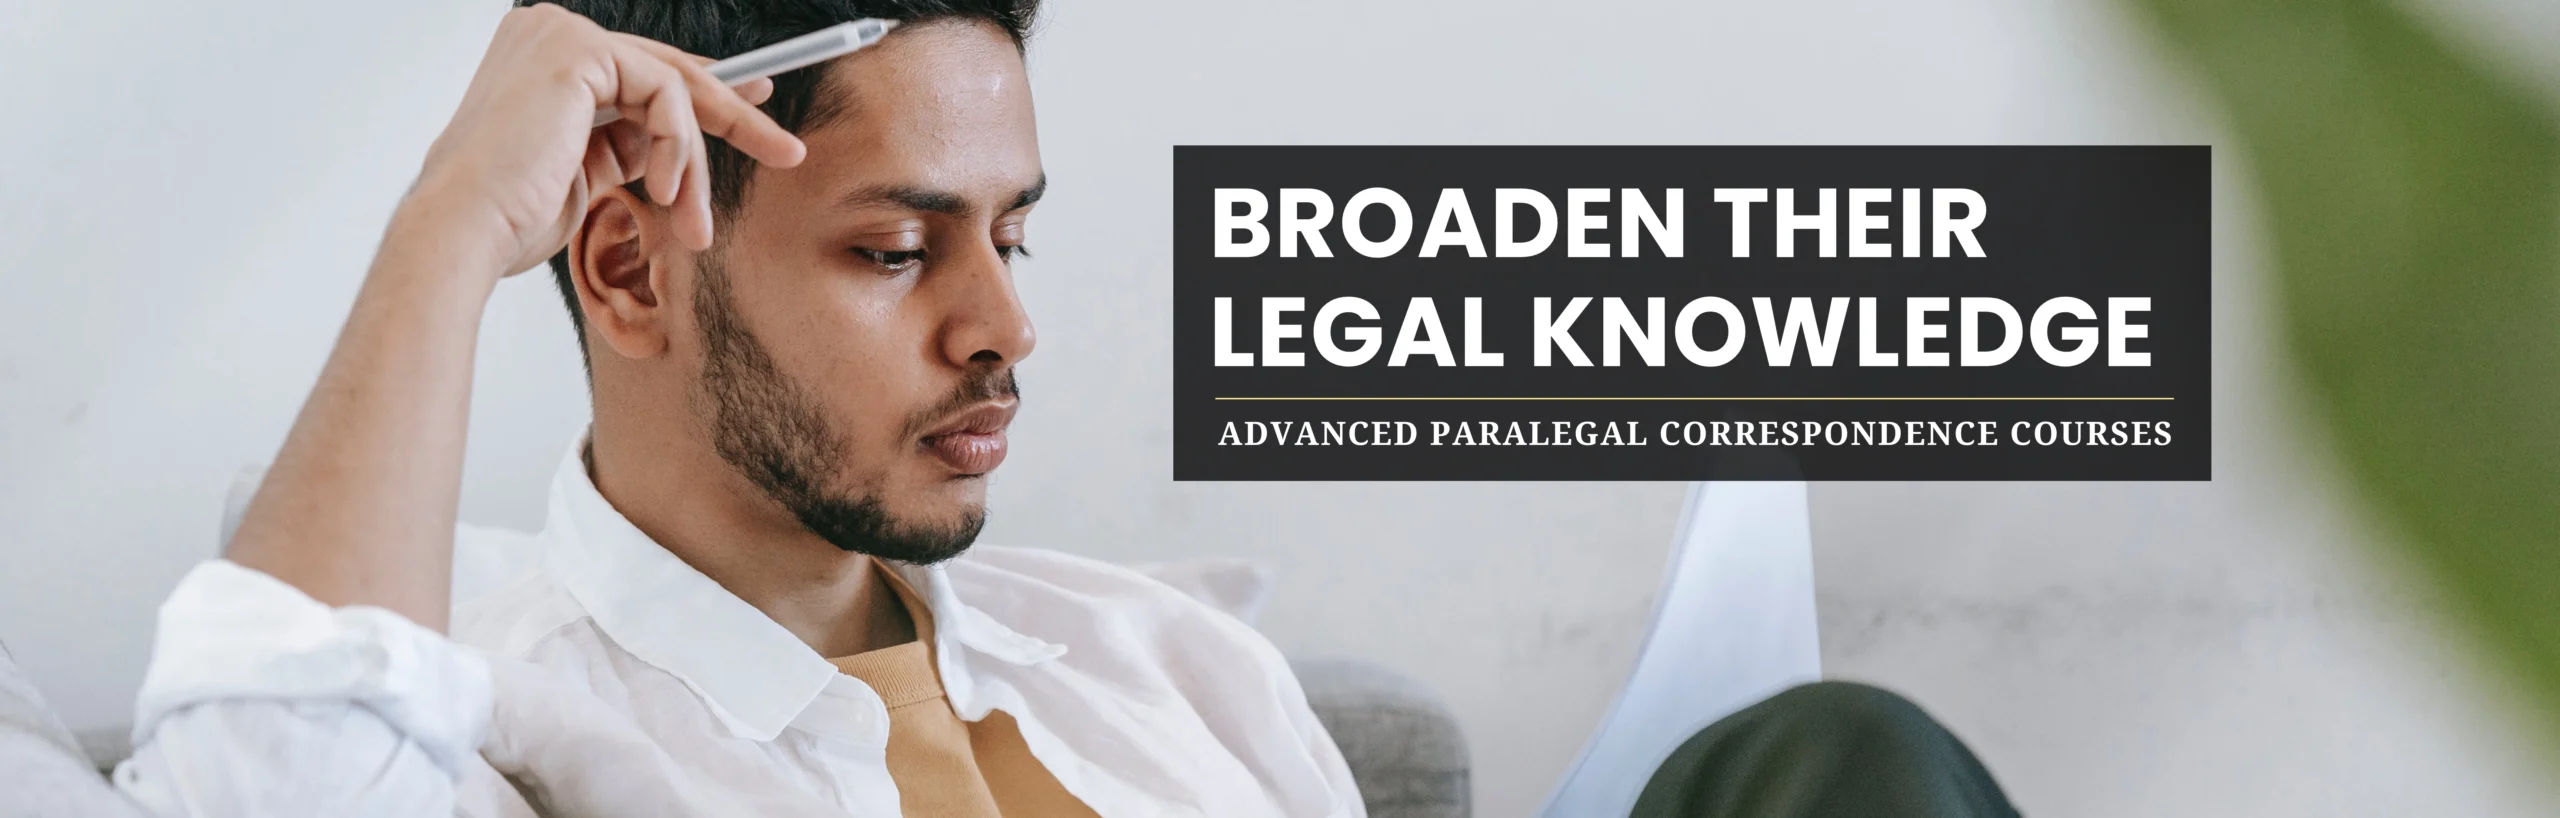 Correspondence Advanced Paralegal Certificate Courses. Broaden Their Legal Knowledge